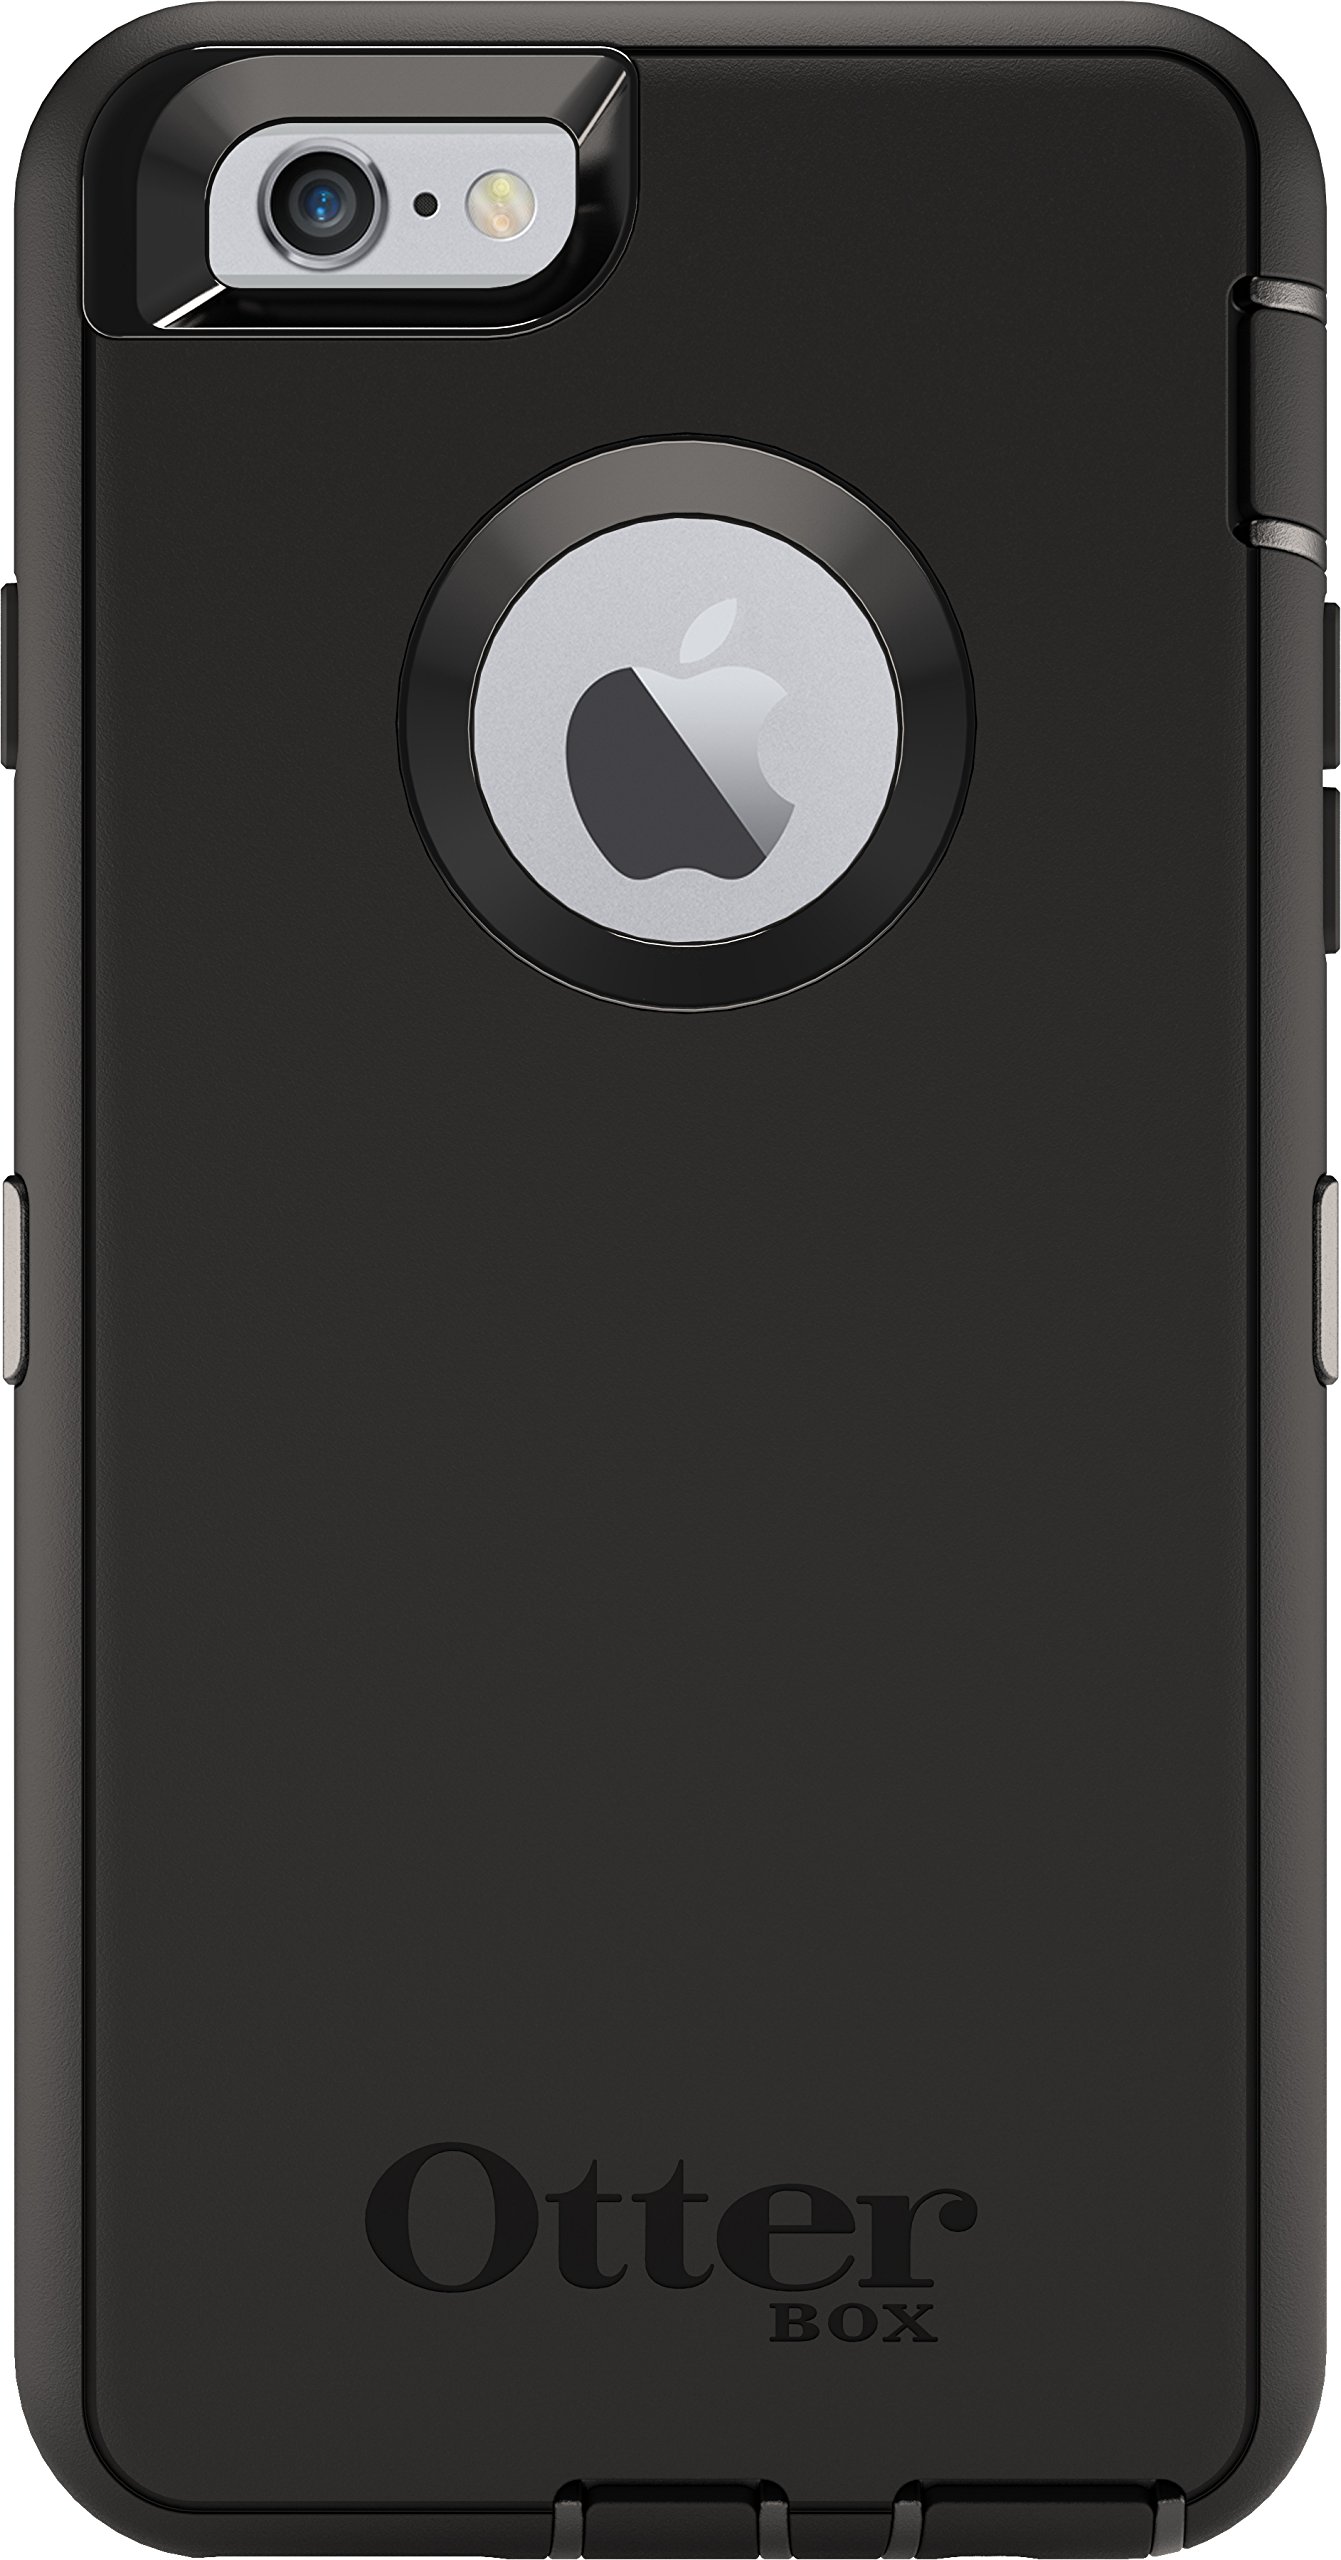 OtterBox IPhone 6 / 6s Defender Series Case - BLACK, Rugged & Durable, With Port Protection, Includes Holster Clip Kickstand